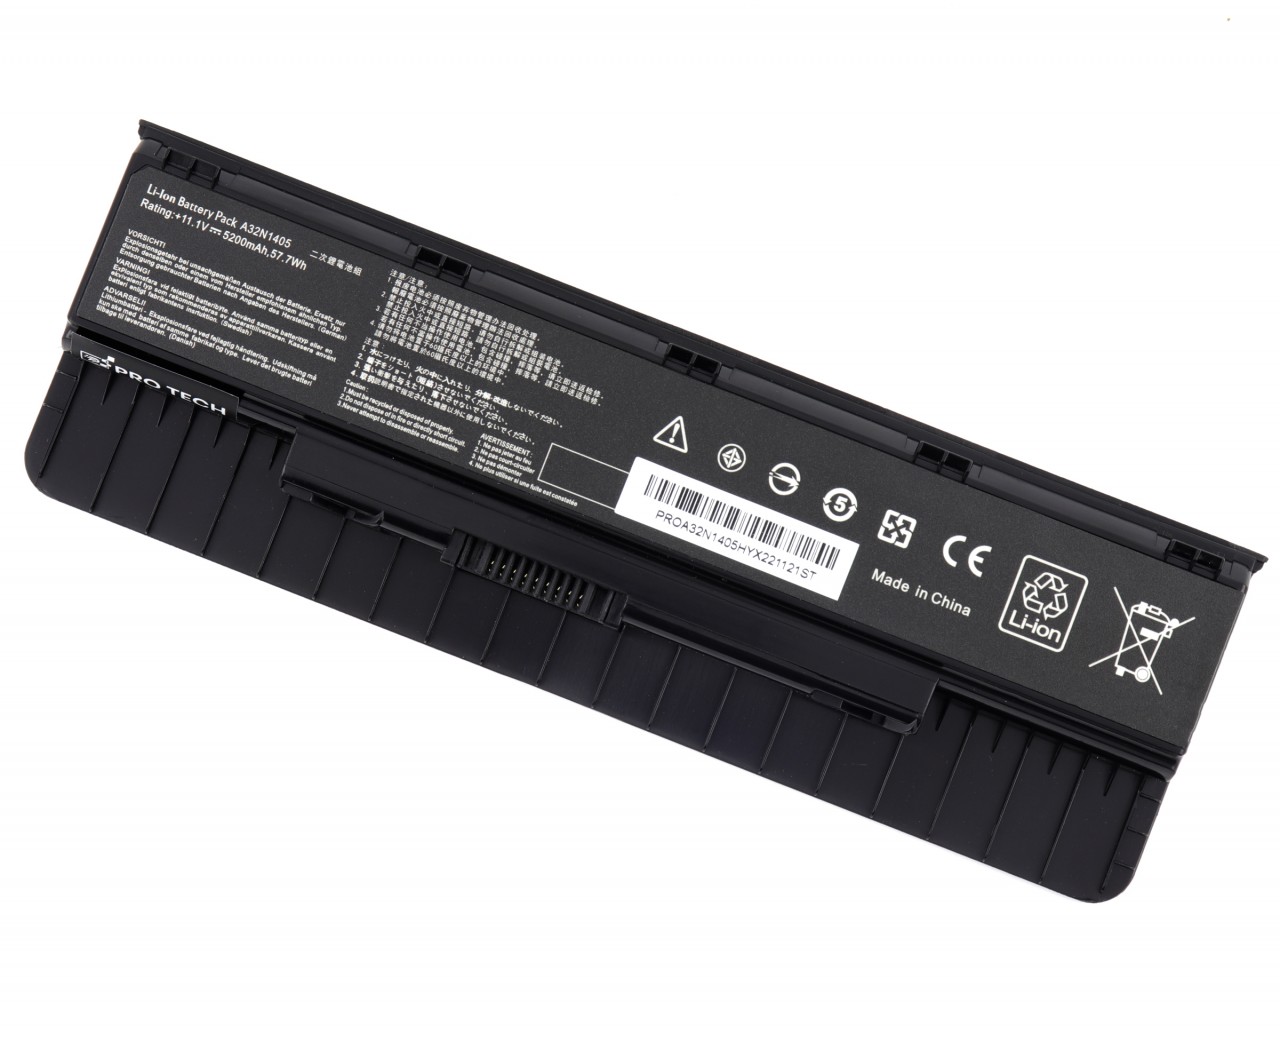 Baterie Asus N56VV 57.7Wh / 5200mAh Protech High Quality Replacement